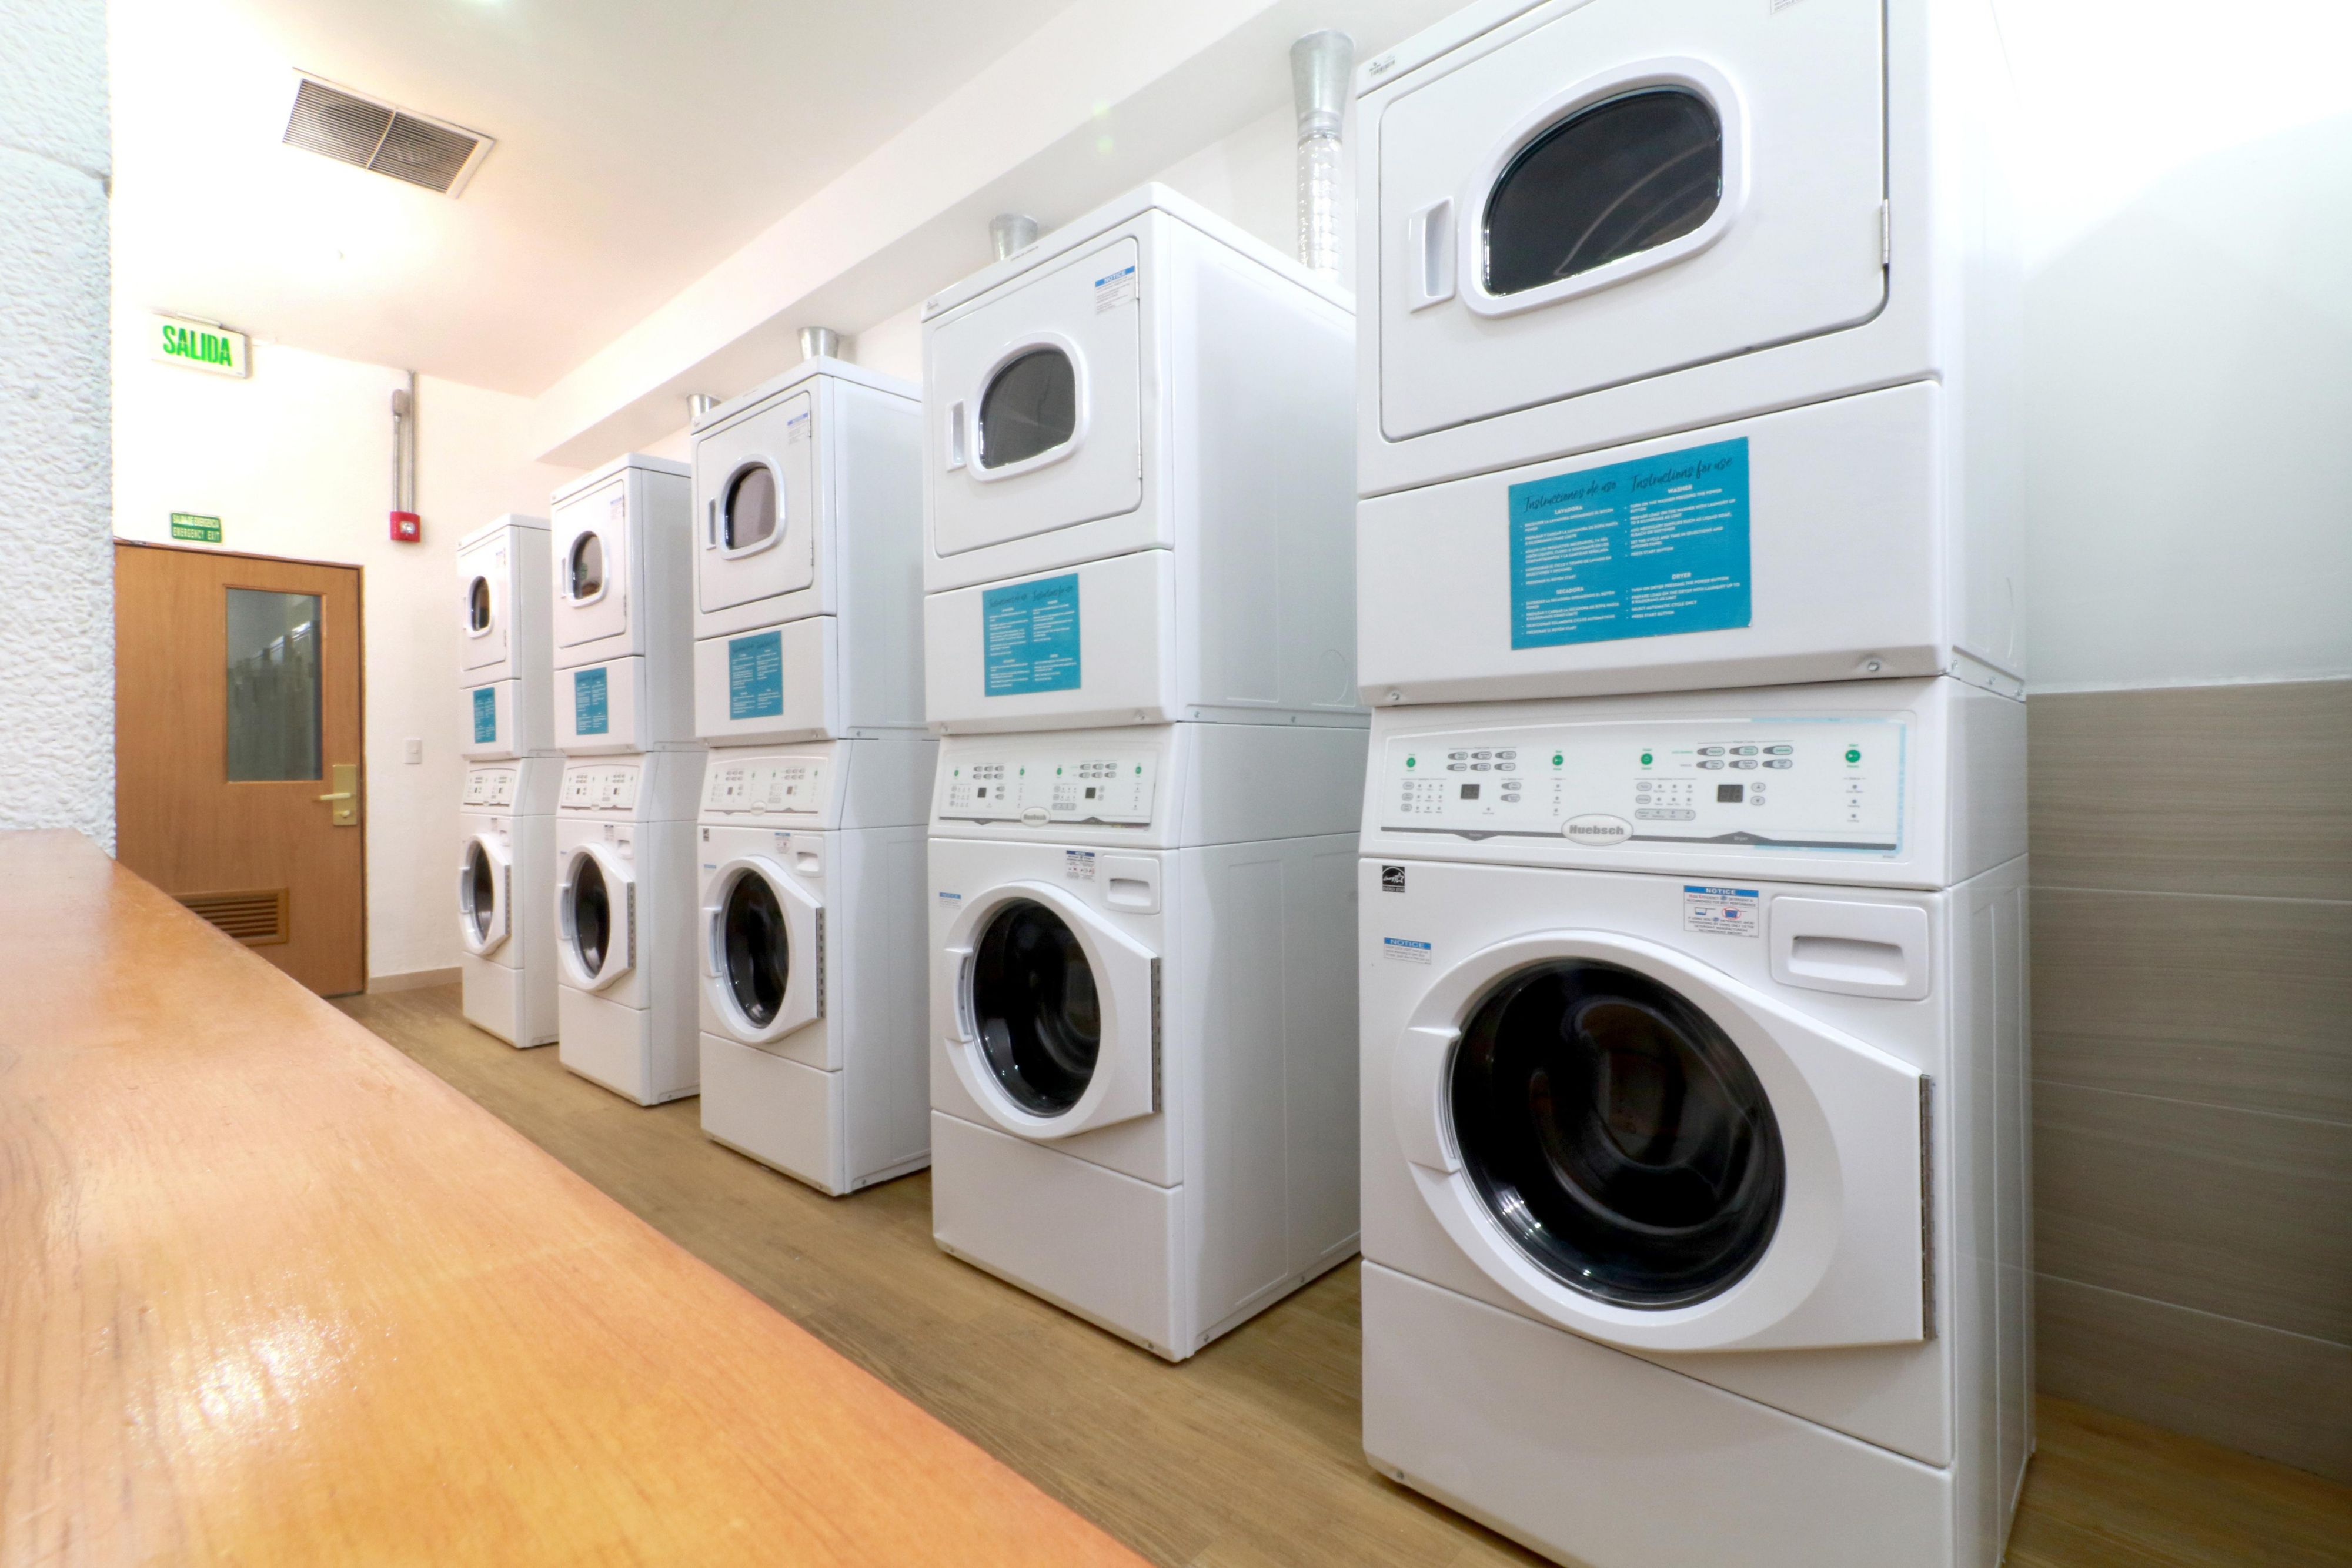 Free laundry center, available 24-hours a day, has 5 self-service washers and 5 dryers for the guest.